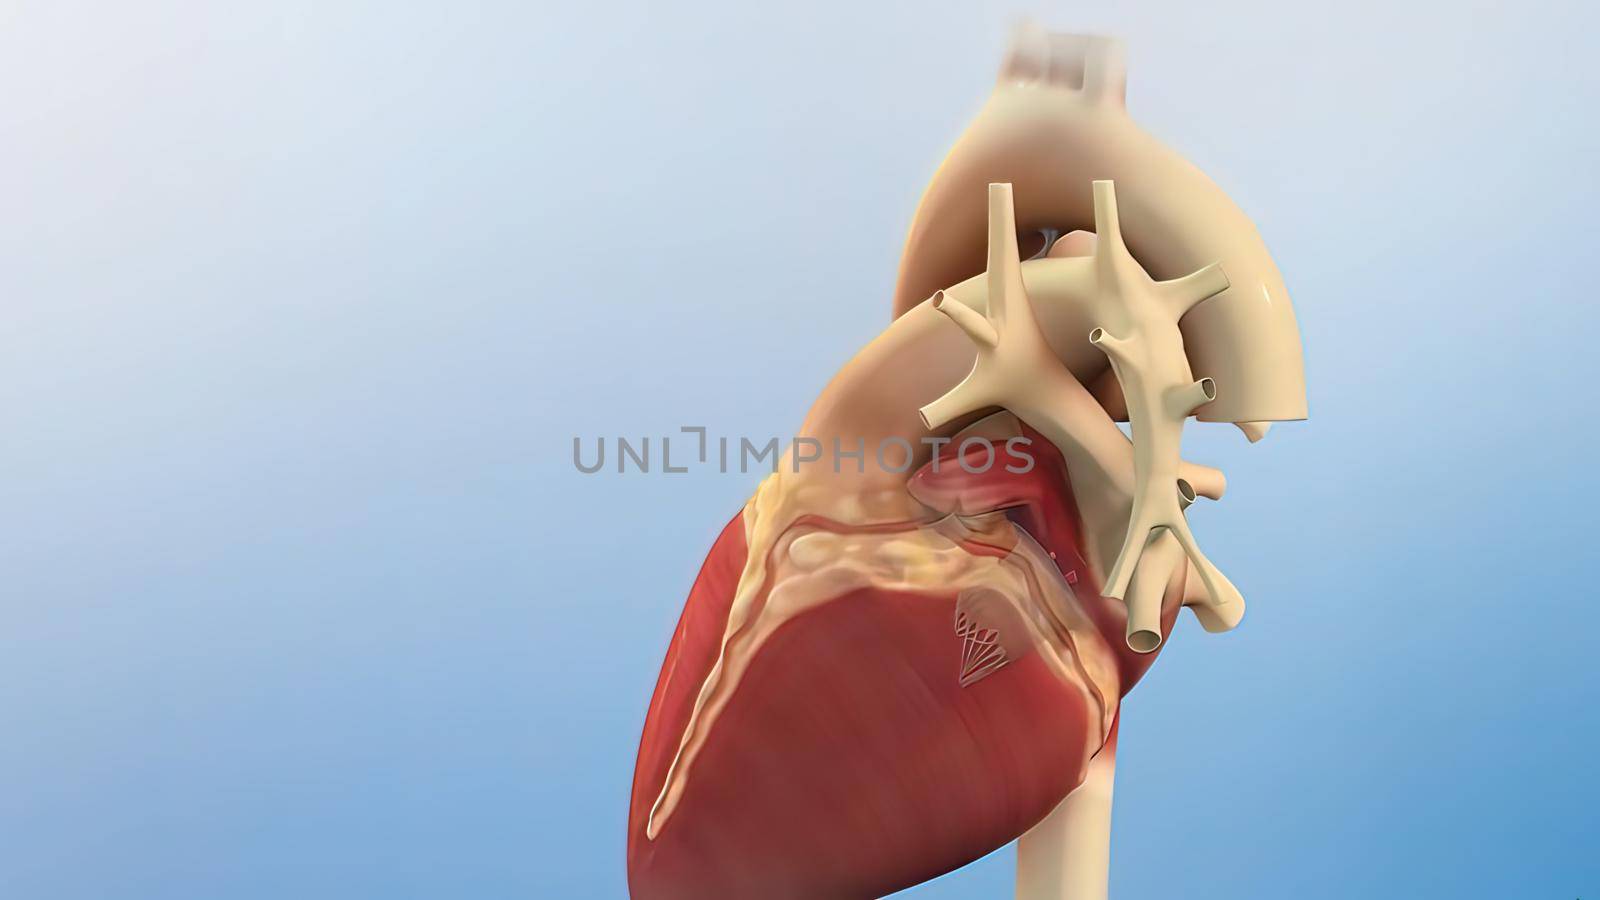 Human heart, realistic anatomy 3d model of human heart on the monitor, by creativepic